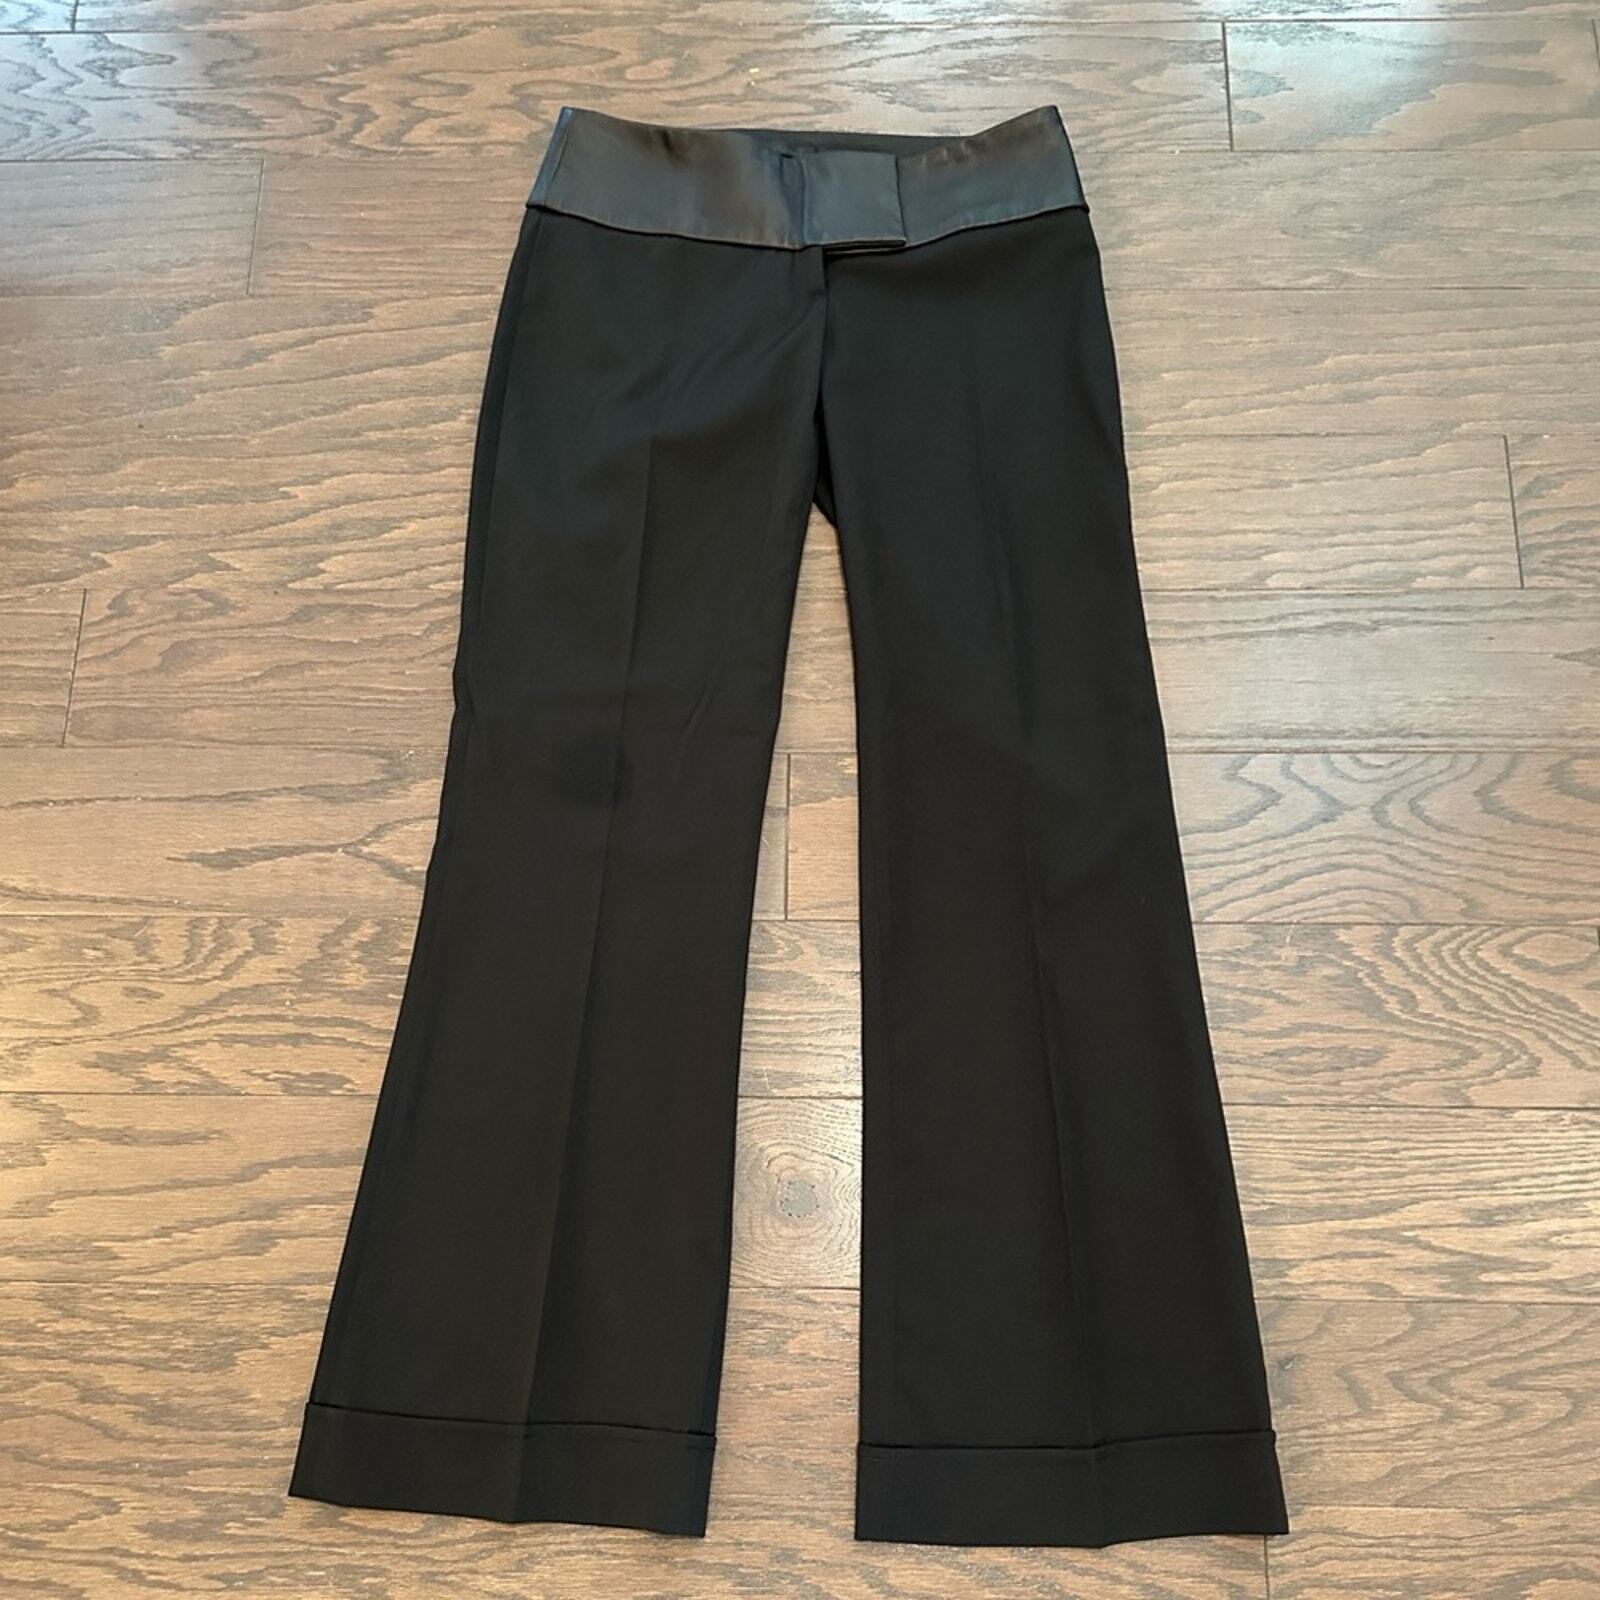 Guess Collection Genuine Leather Trim Black Flare Pants Size 2